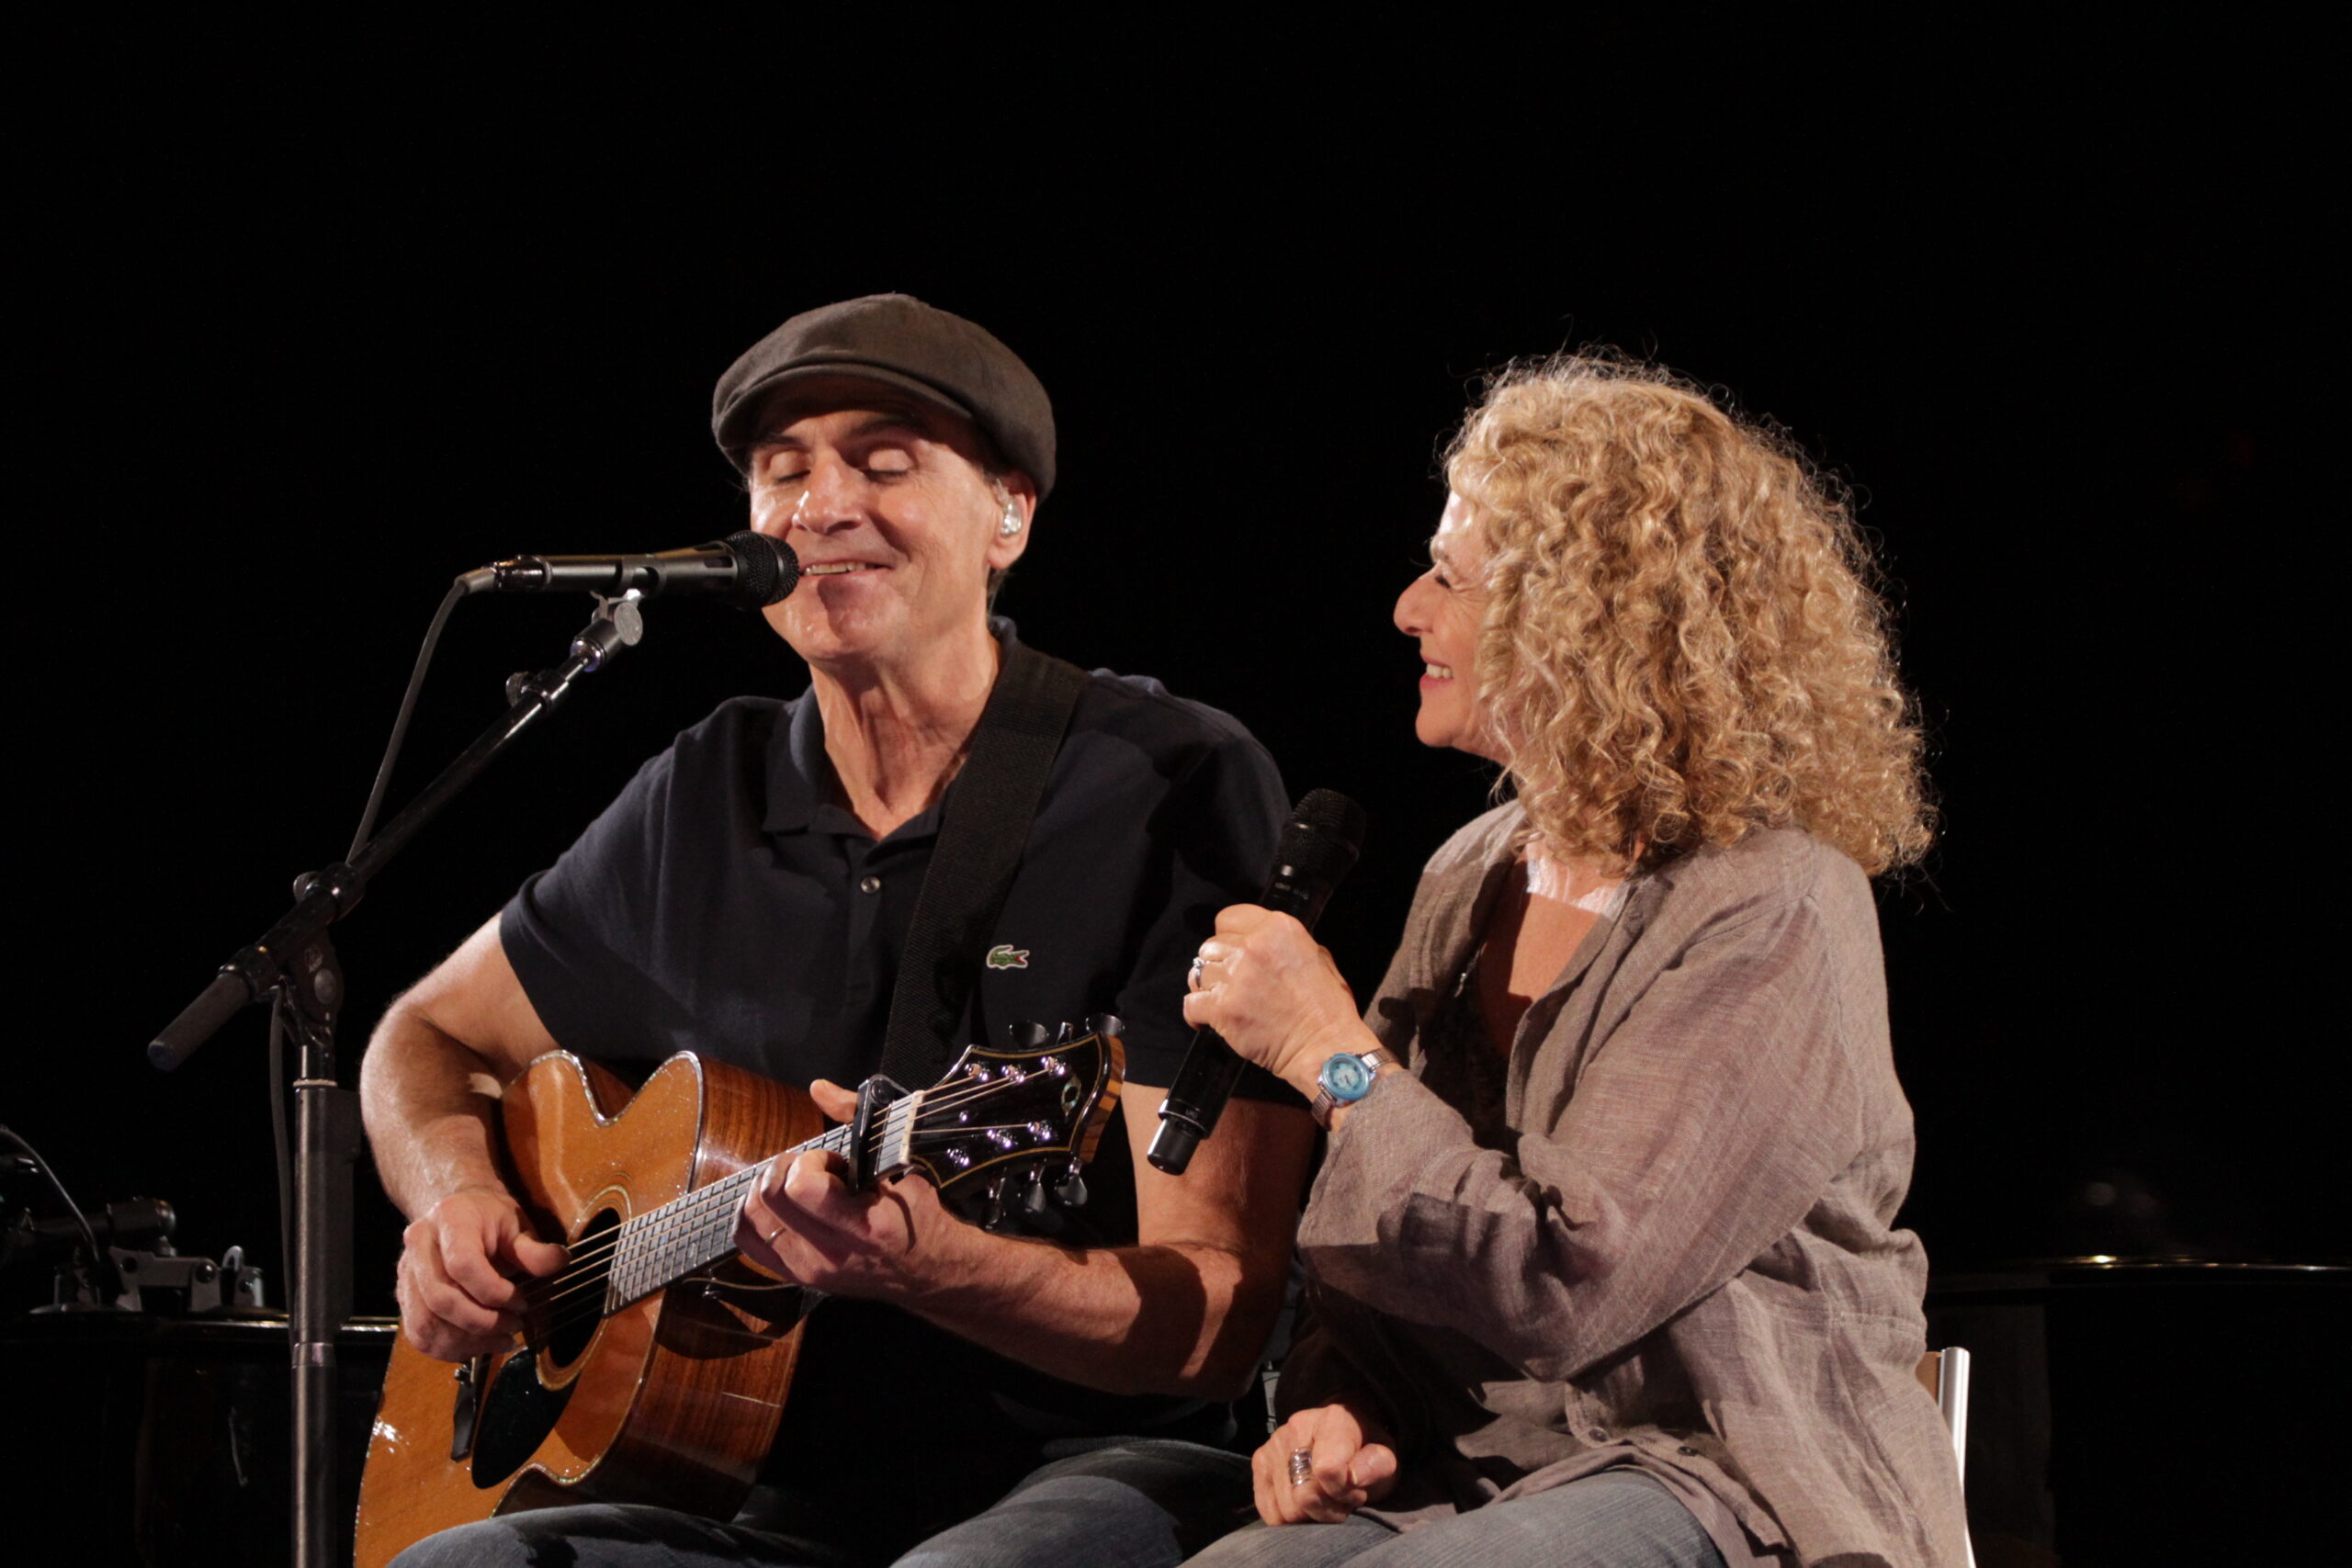 A white man wearing a Black t-shirt and Black cap plays the guitar in front of a mic. A white woman with wavy gray shoulder length hair sits next to him with a microphone in hand.